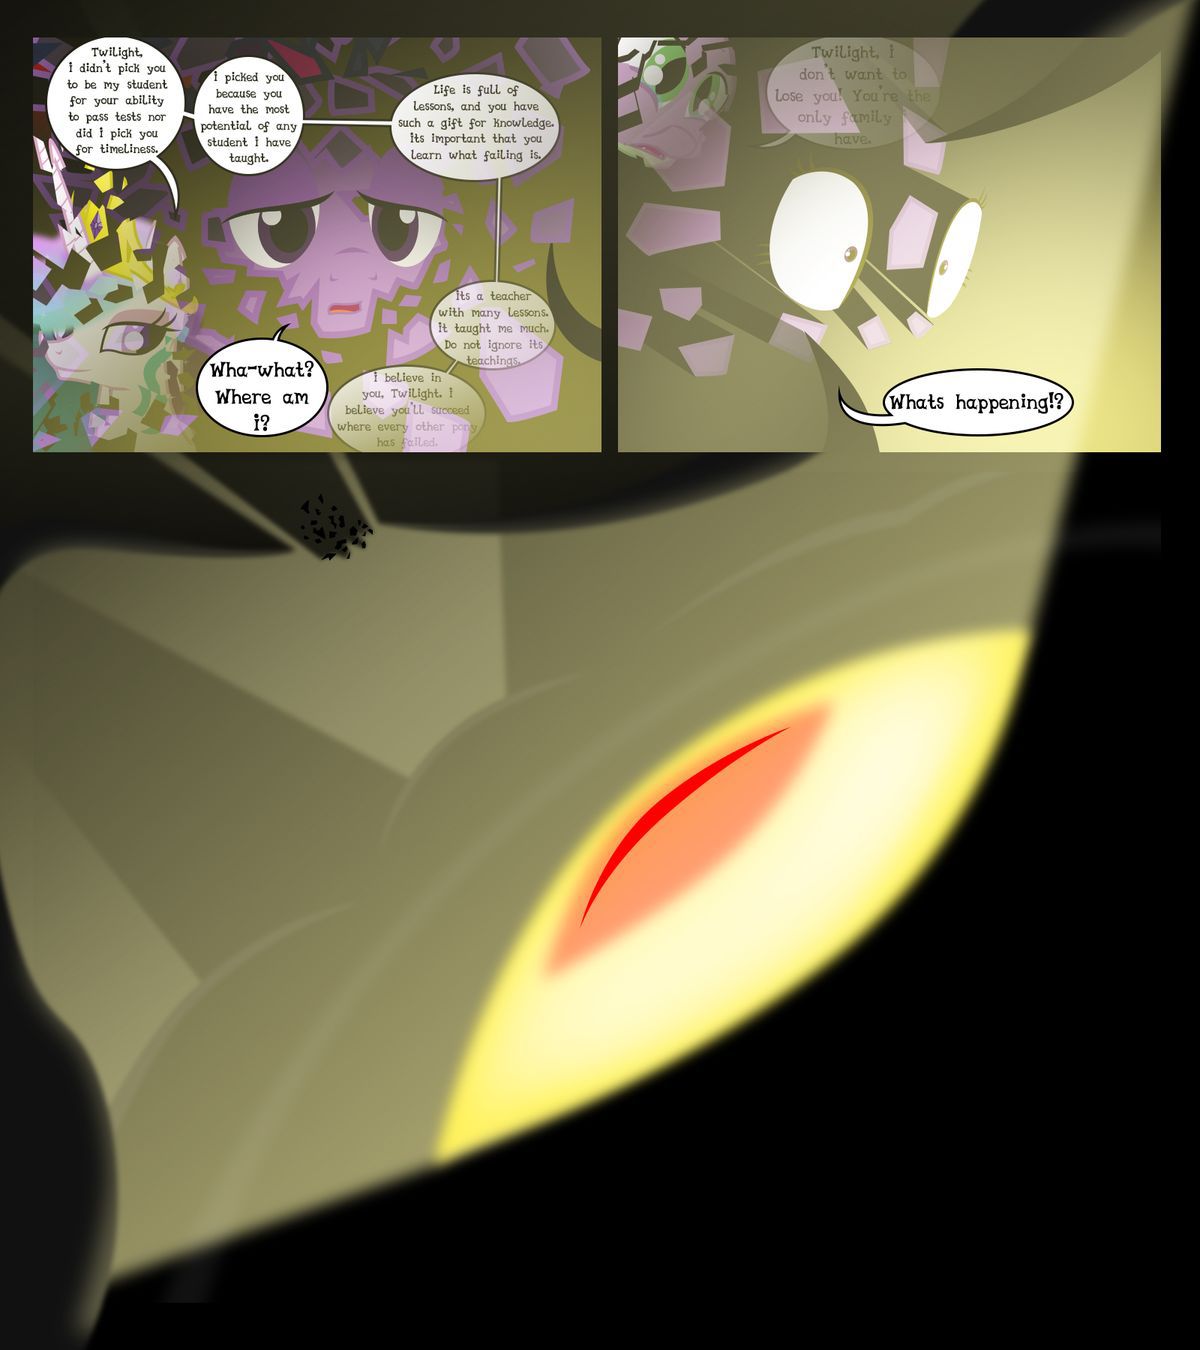 [GatesMcCloud] Cutie Mark Crusaders 10k: Chapter 3 - The Lost (My Little Pony: Friendship is Magic) [English] [Ongoing] 6